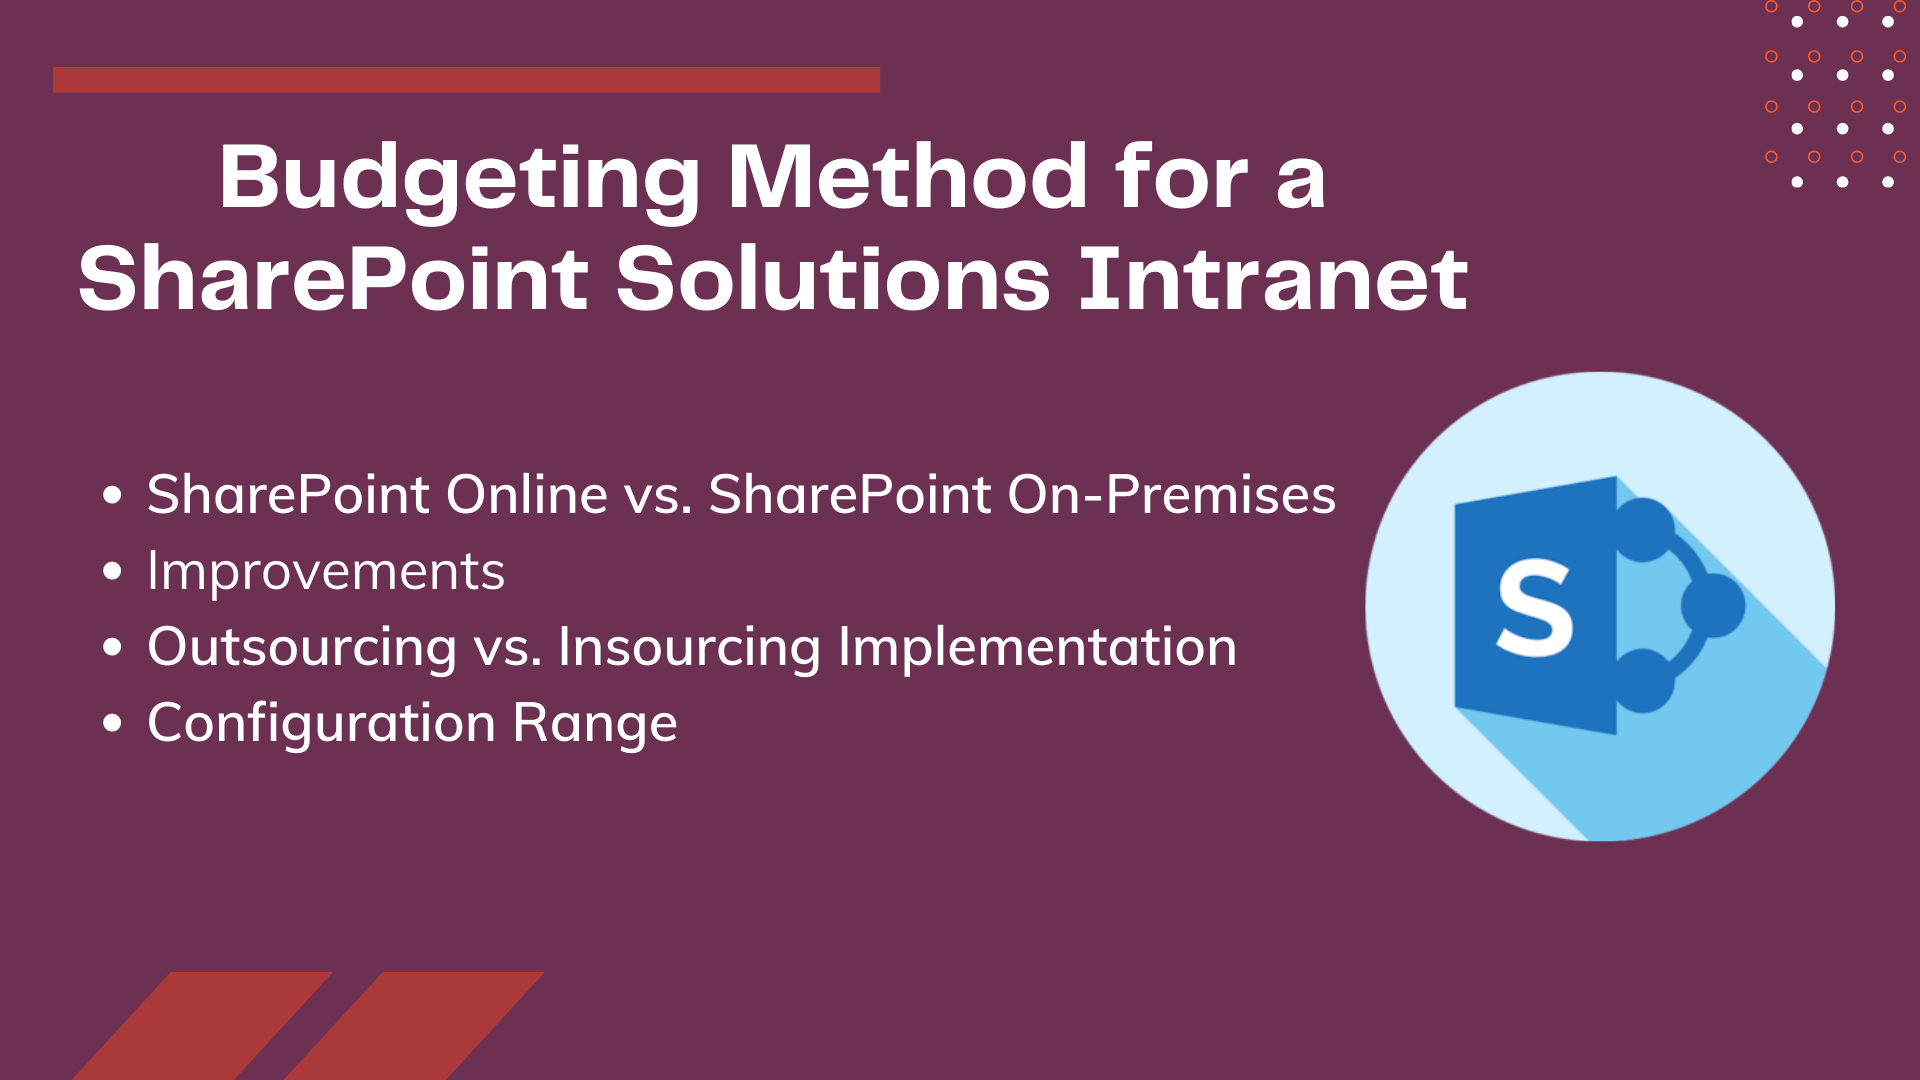 Budgeting Method for a SharePoint Solutions Intranet